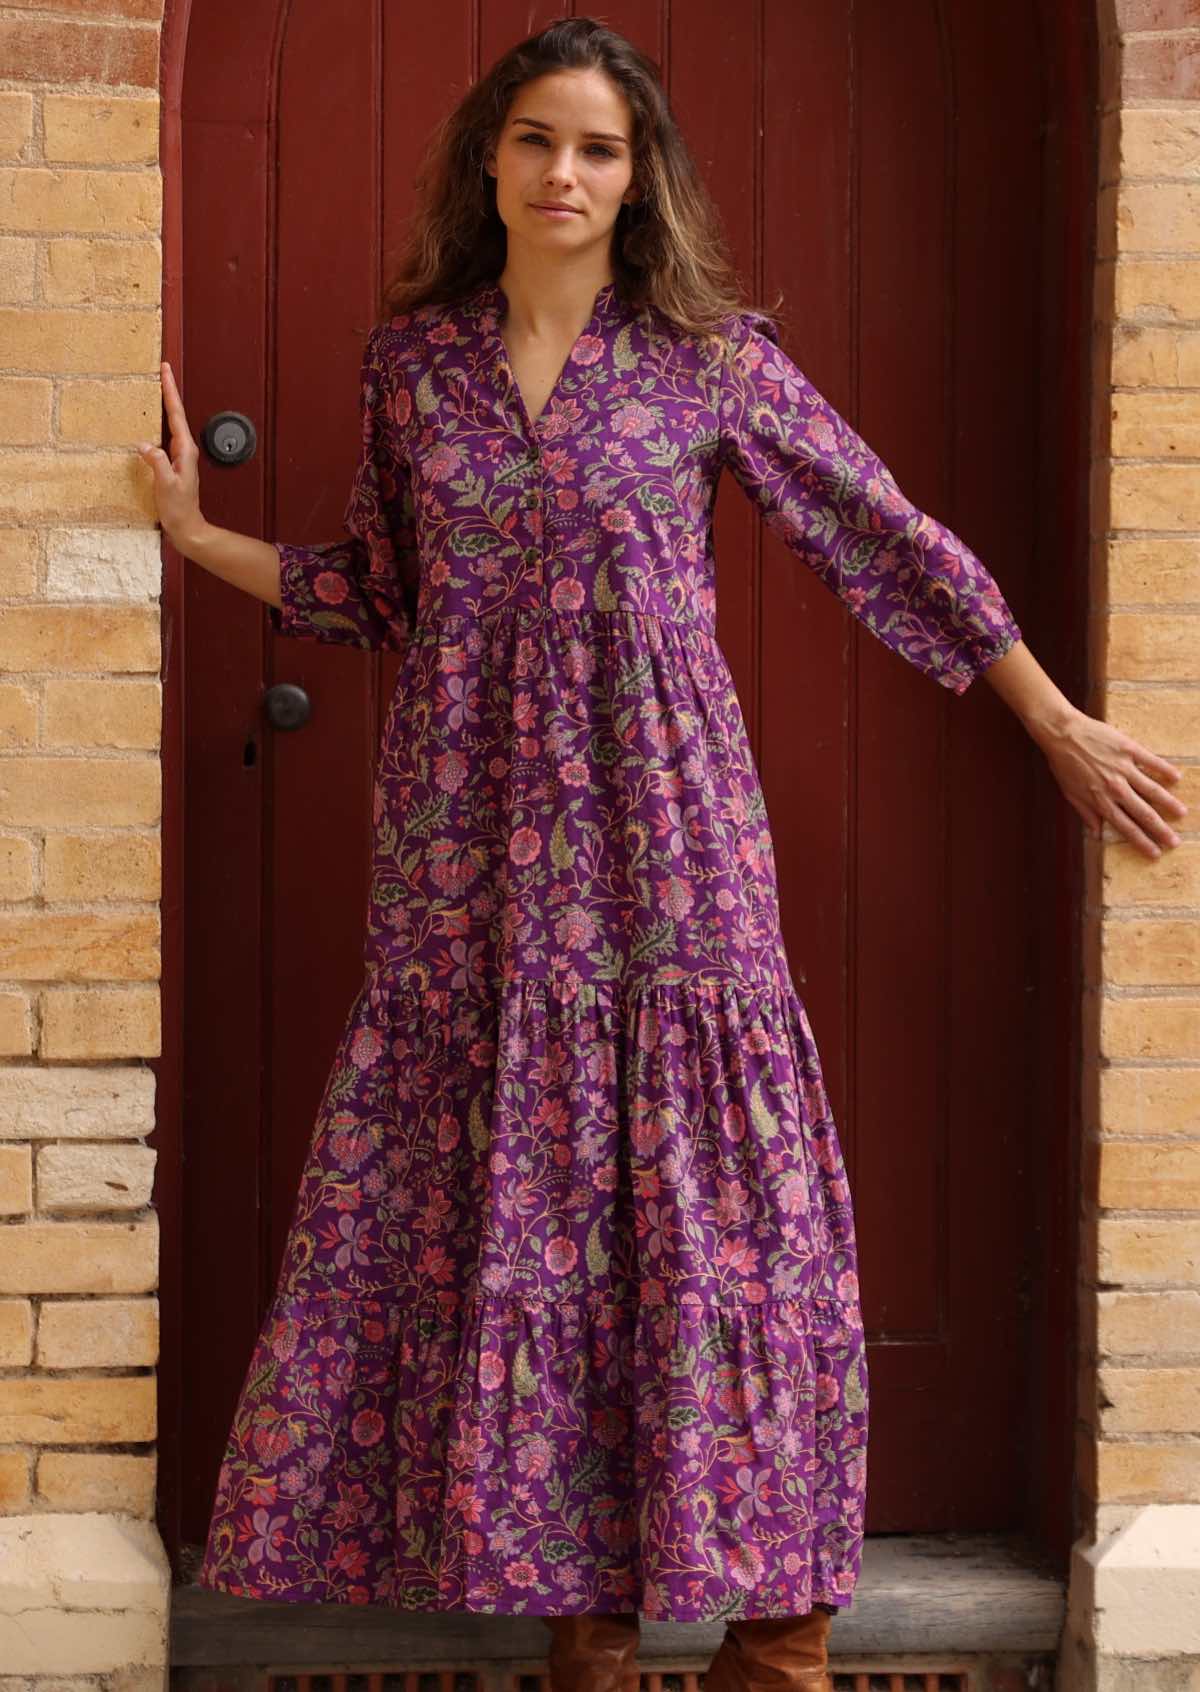 100% cotton tiered maxi dress with hidden side pockets